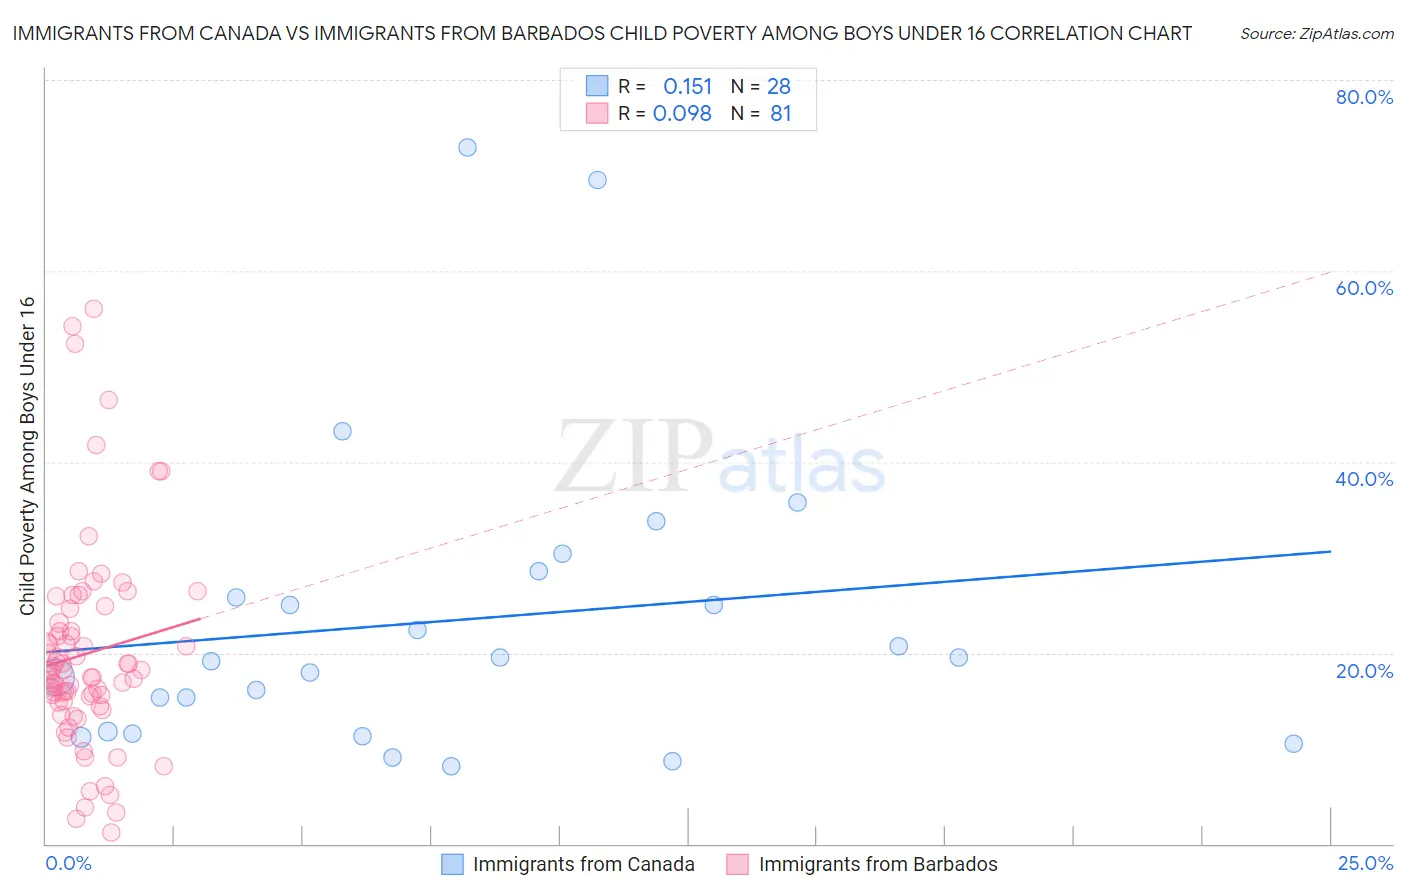 Immigrants from Canada vs Immigrants from Barbados Child Poverty Among Boys Under 16